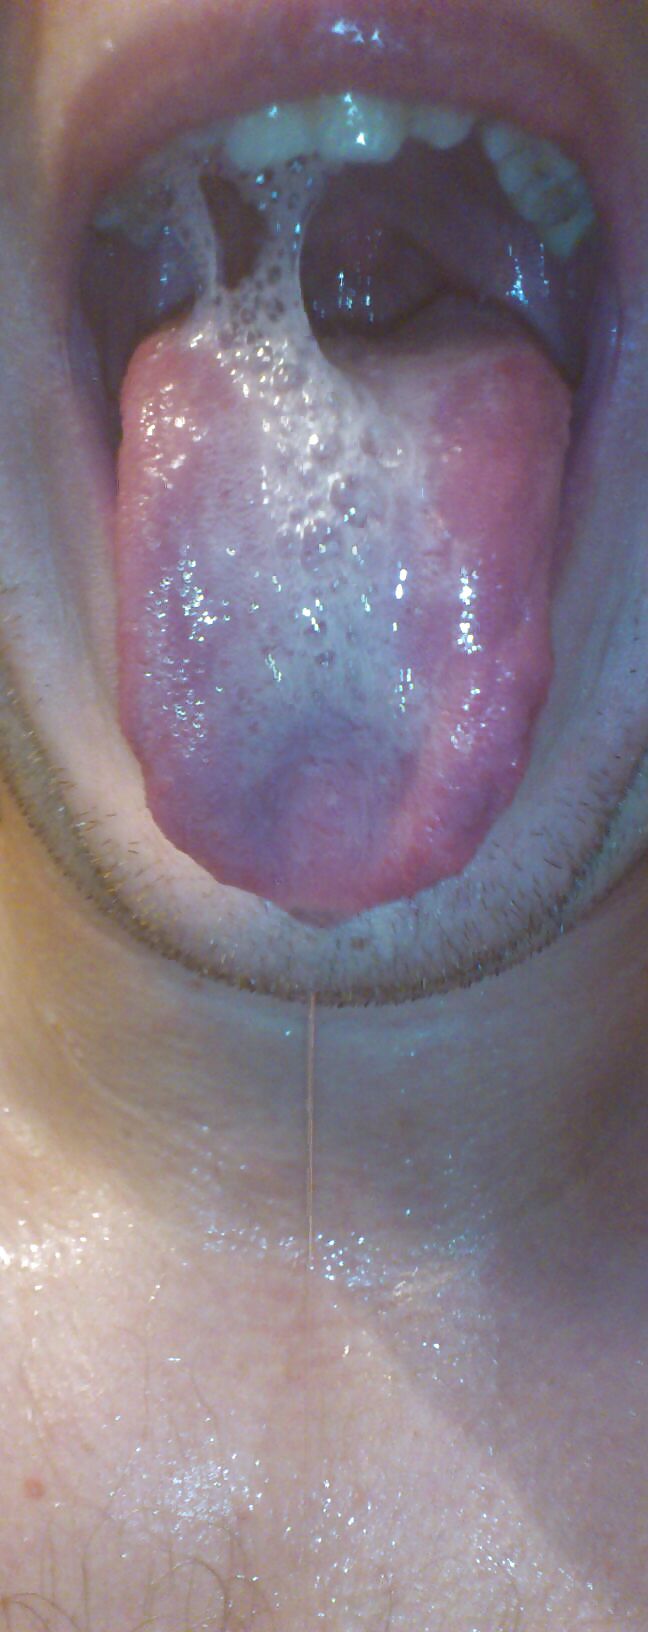 Sexy wet tongue and saliva porn gallery